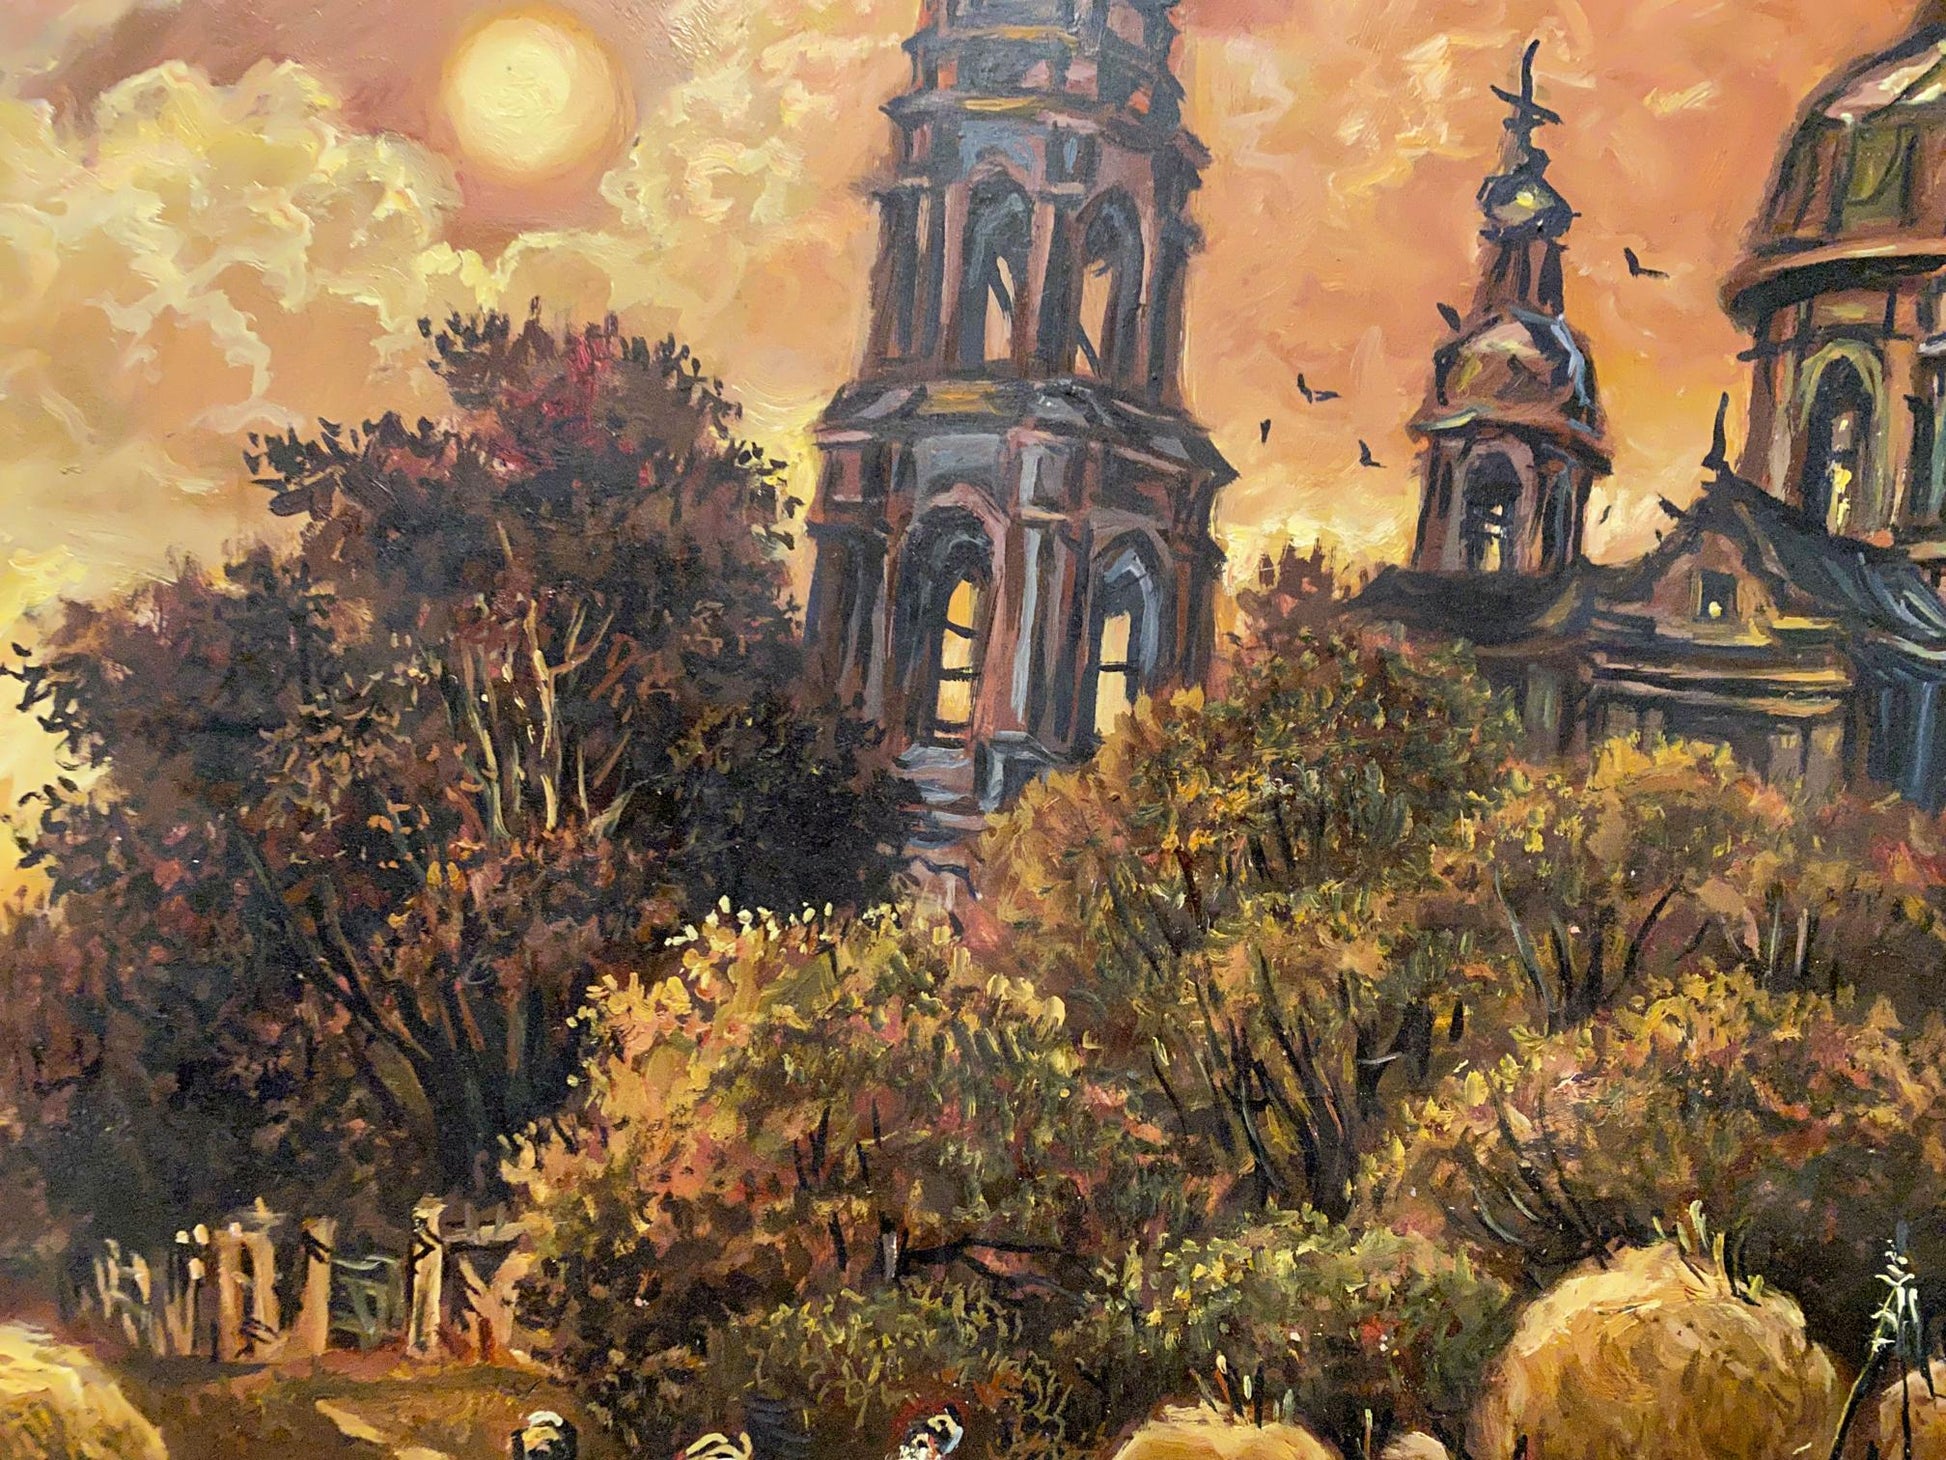 Monastery with a Crimson Sunset, created by Alexander Litvinov in oil